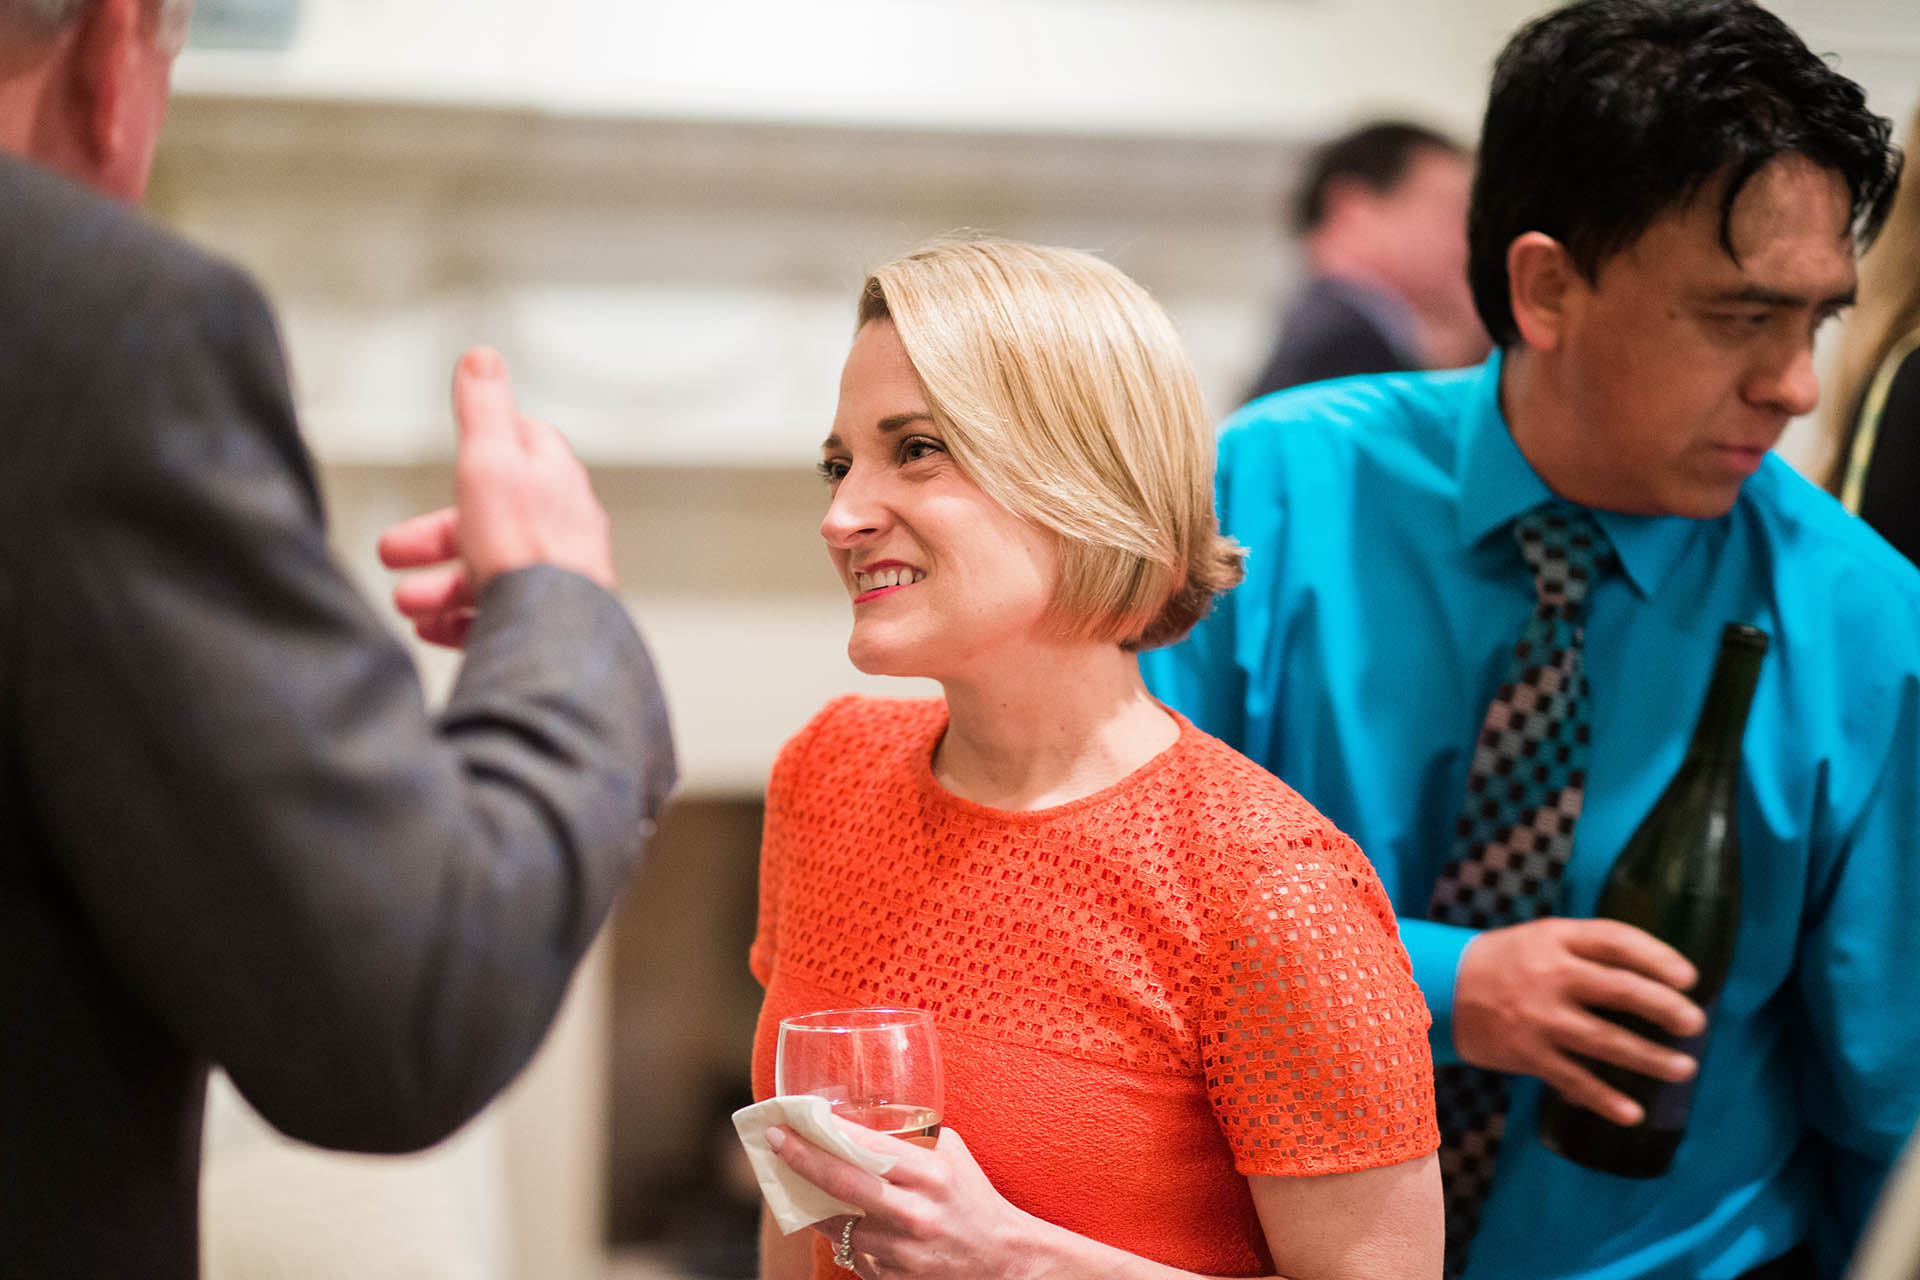 Event photography DFW candid photo of a woman in an orange dress smiling and conversing with another professional at a coporate event while holding a glass of wine.